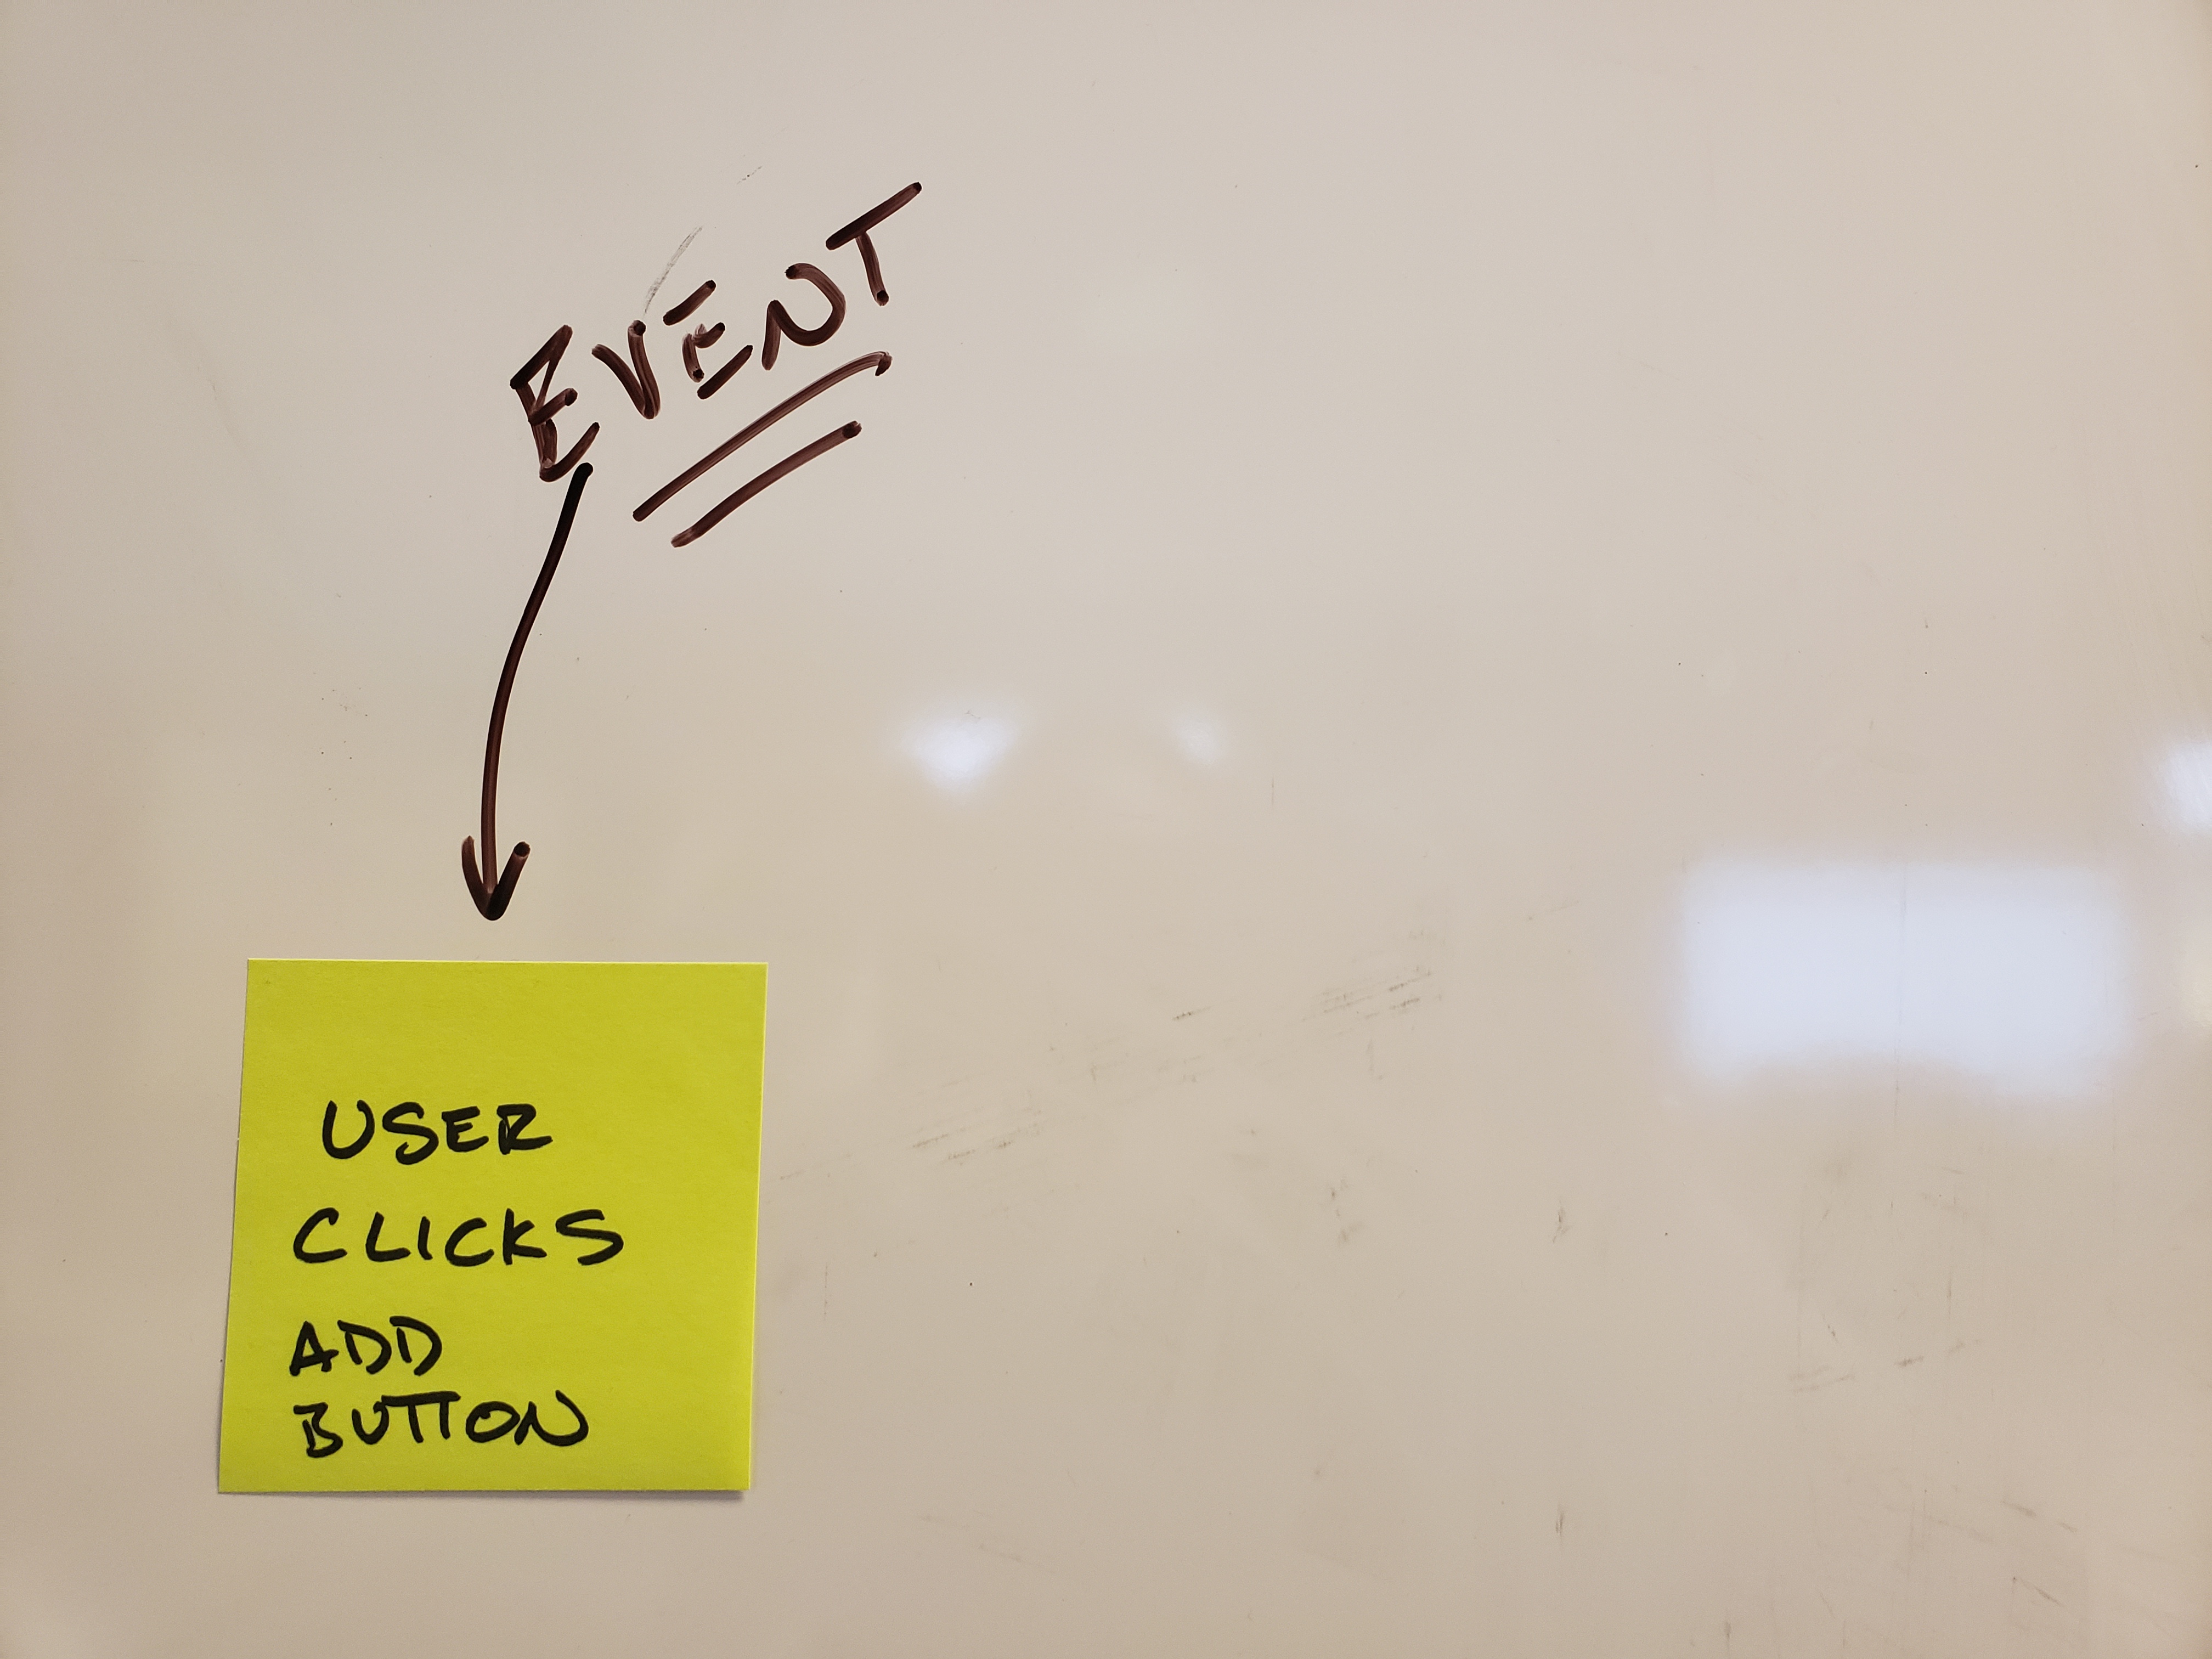 Sticky note with "User Clicks Add Button" written on it